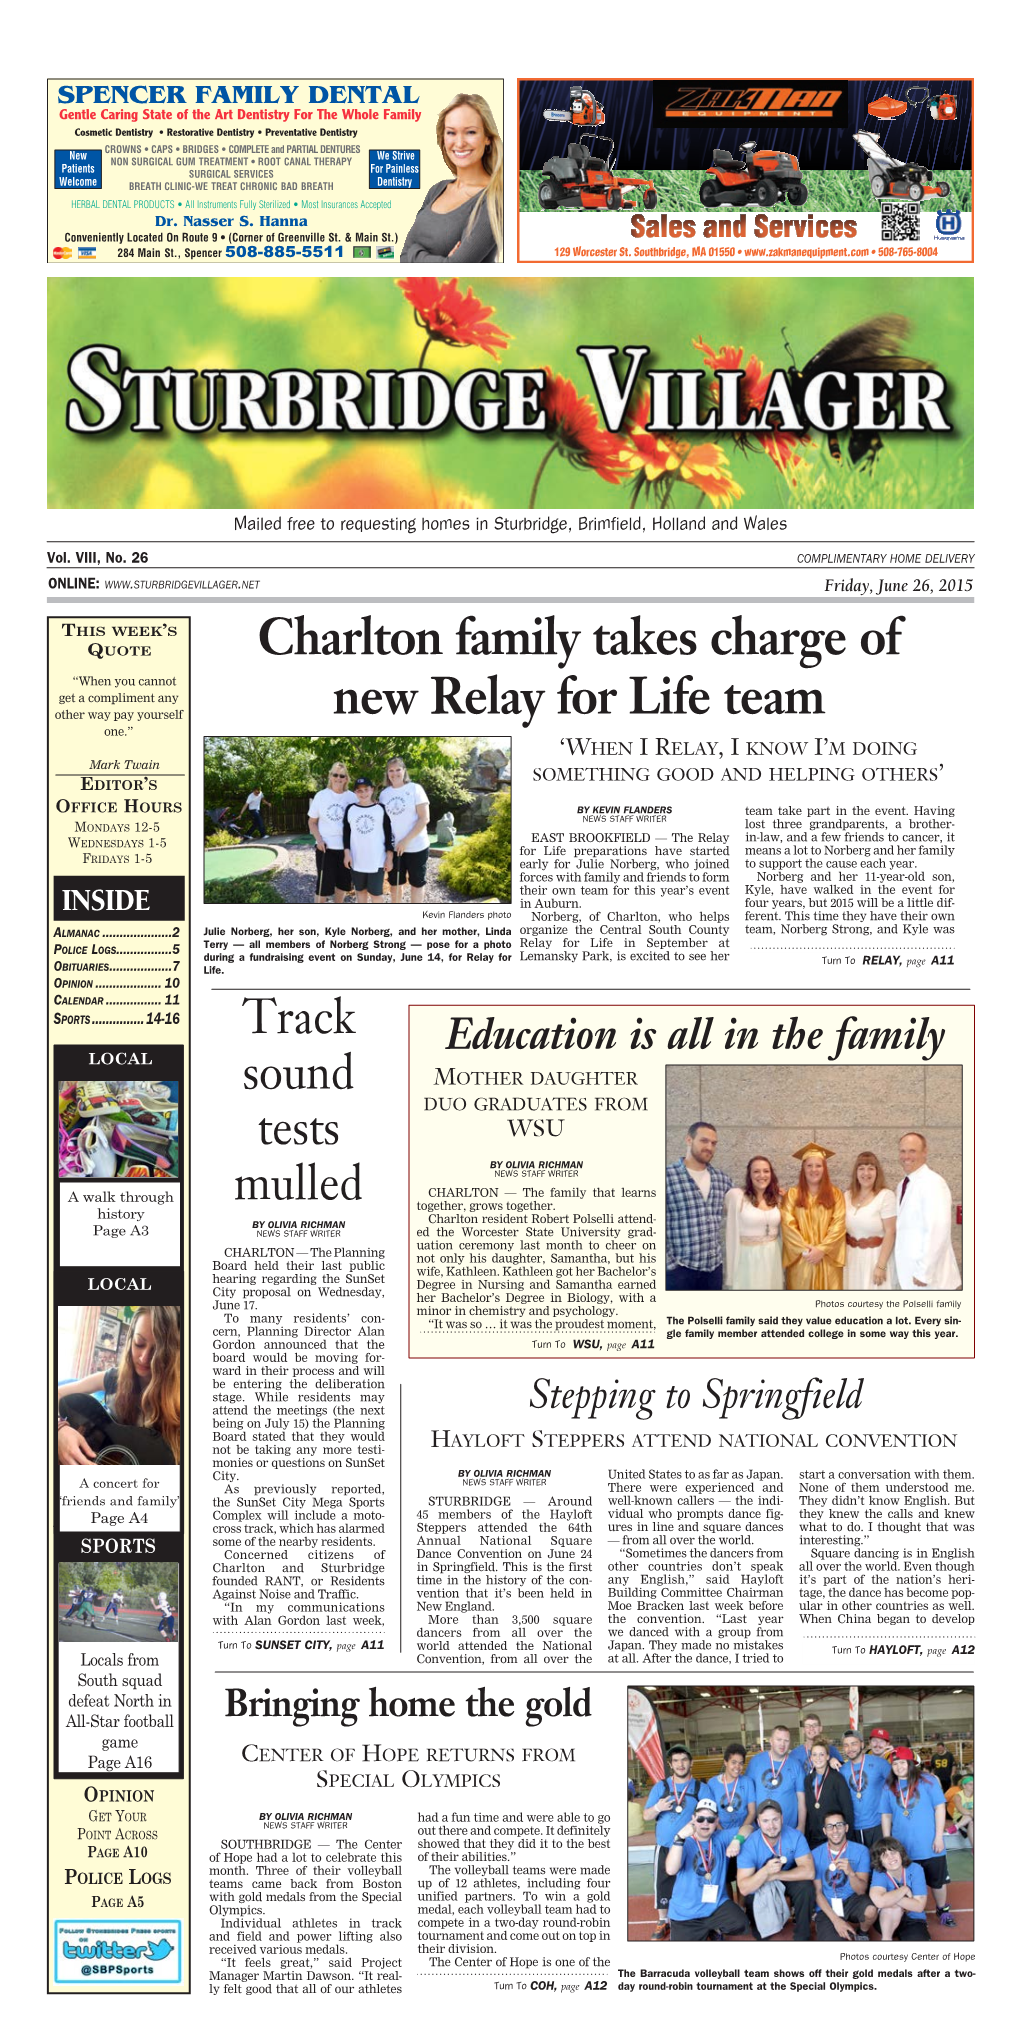 Charlton Family Takes Charge of New Relay for Life Team